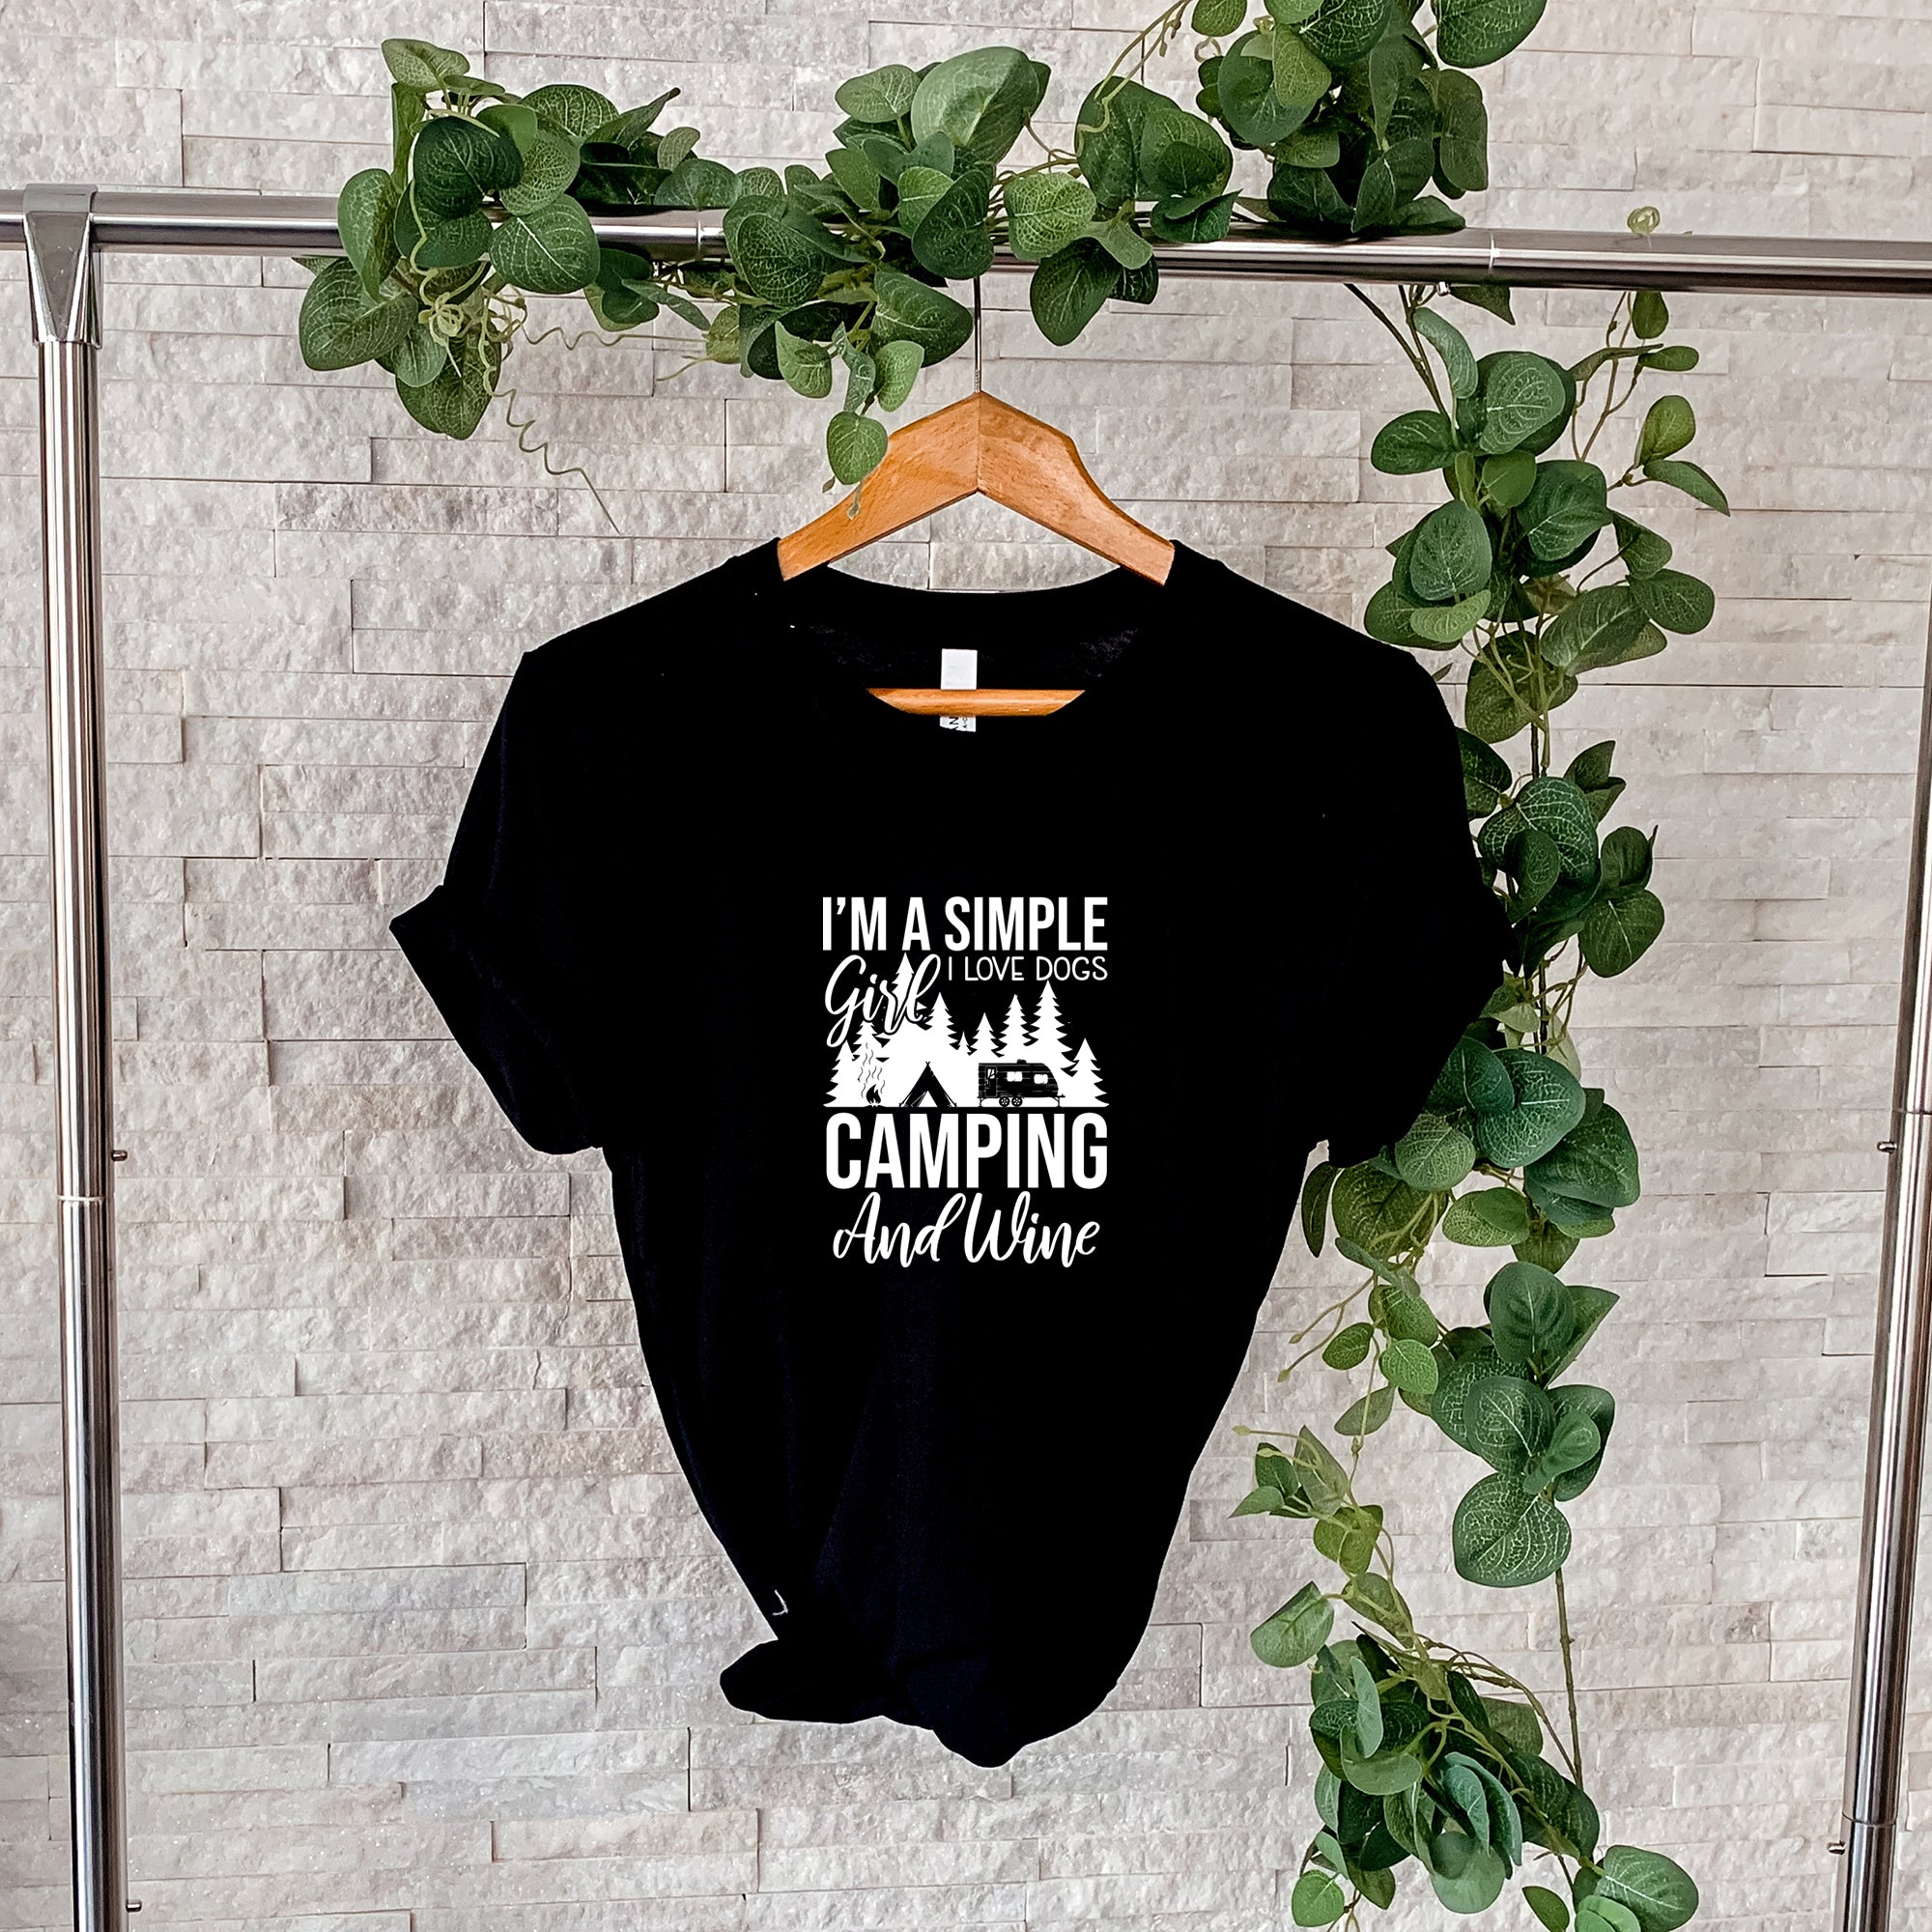 I'm a simple girl, I love dogs, camping and wine Printify